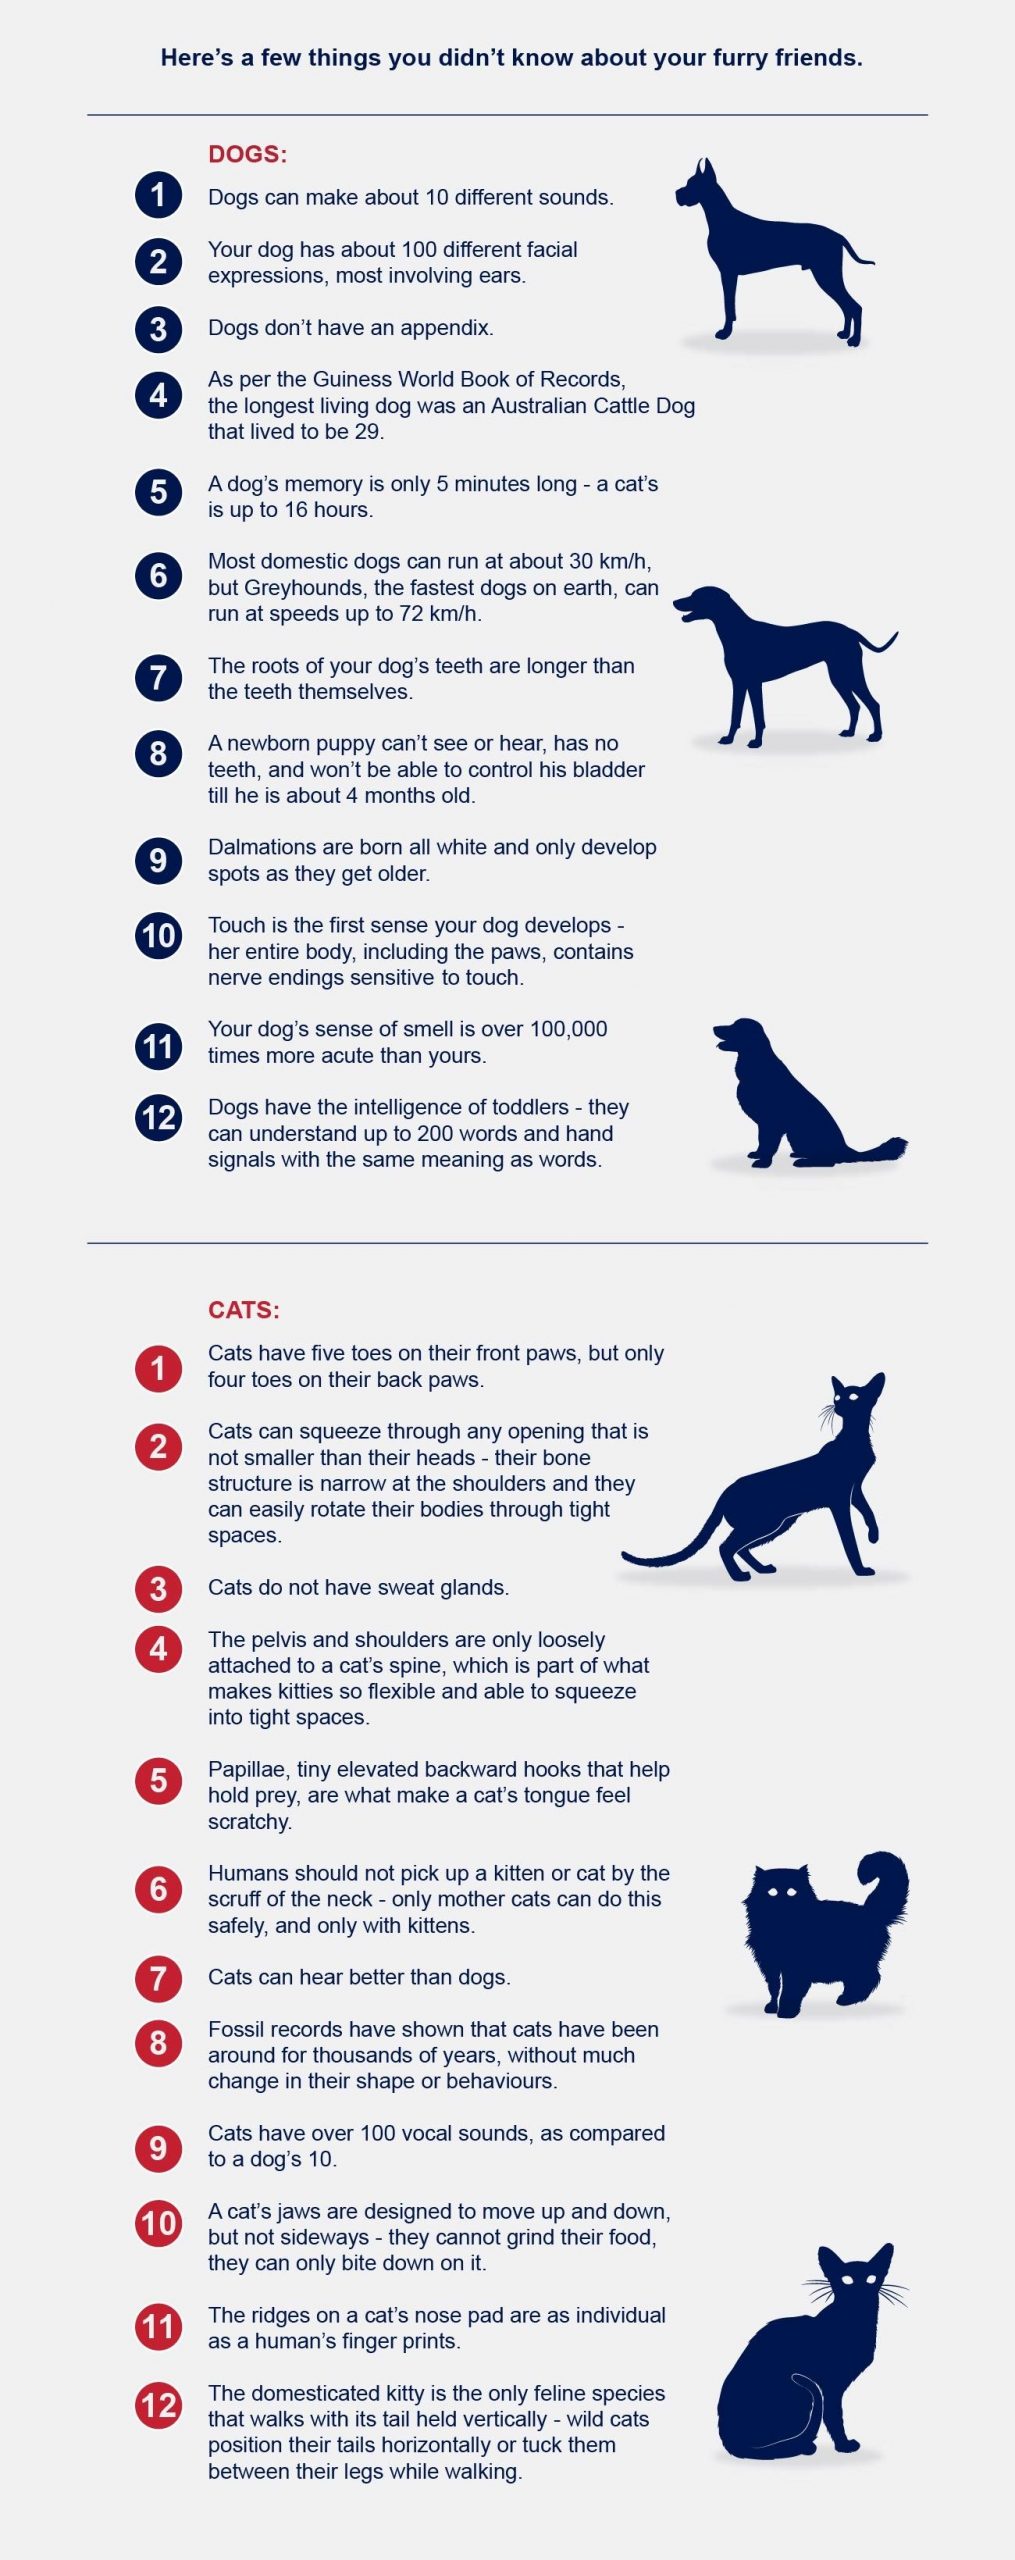 5 Astonishing Similarities Between Cats and Dogs